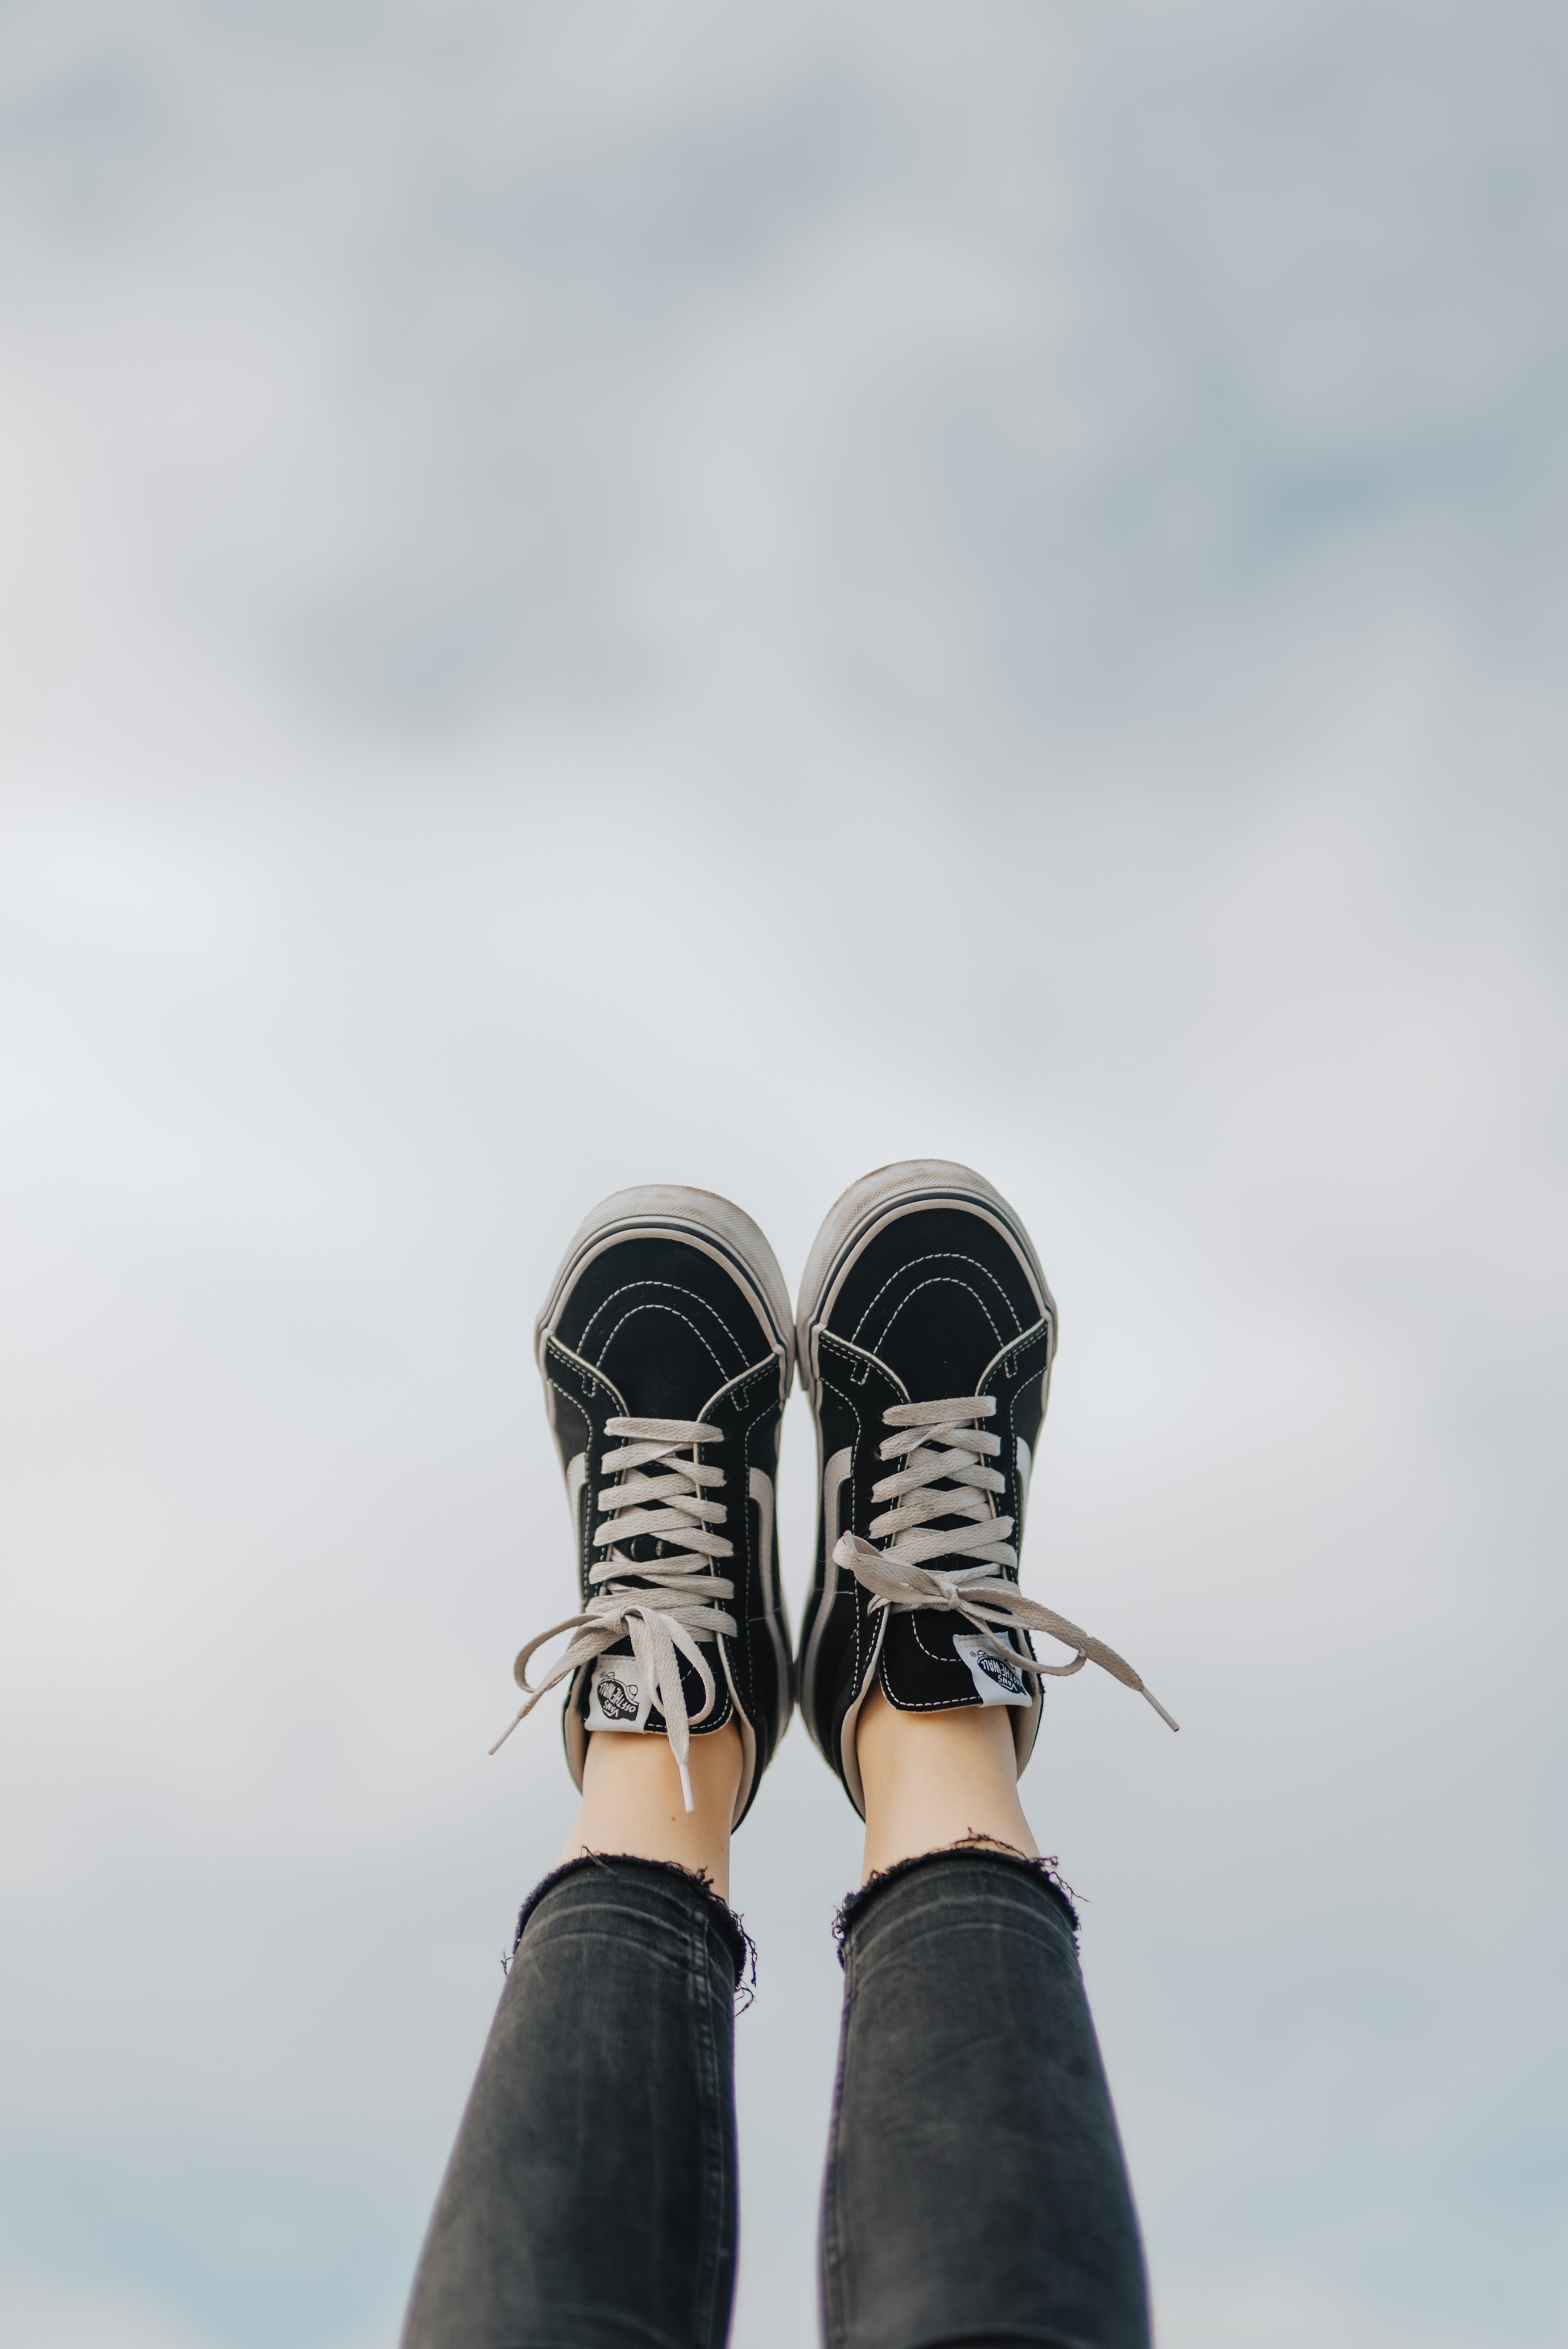 Download mobile wallpaper Miscellaneous, Miscellanea, Footwear, Legs, Sneakers, Shoes for free.